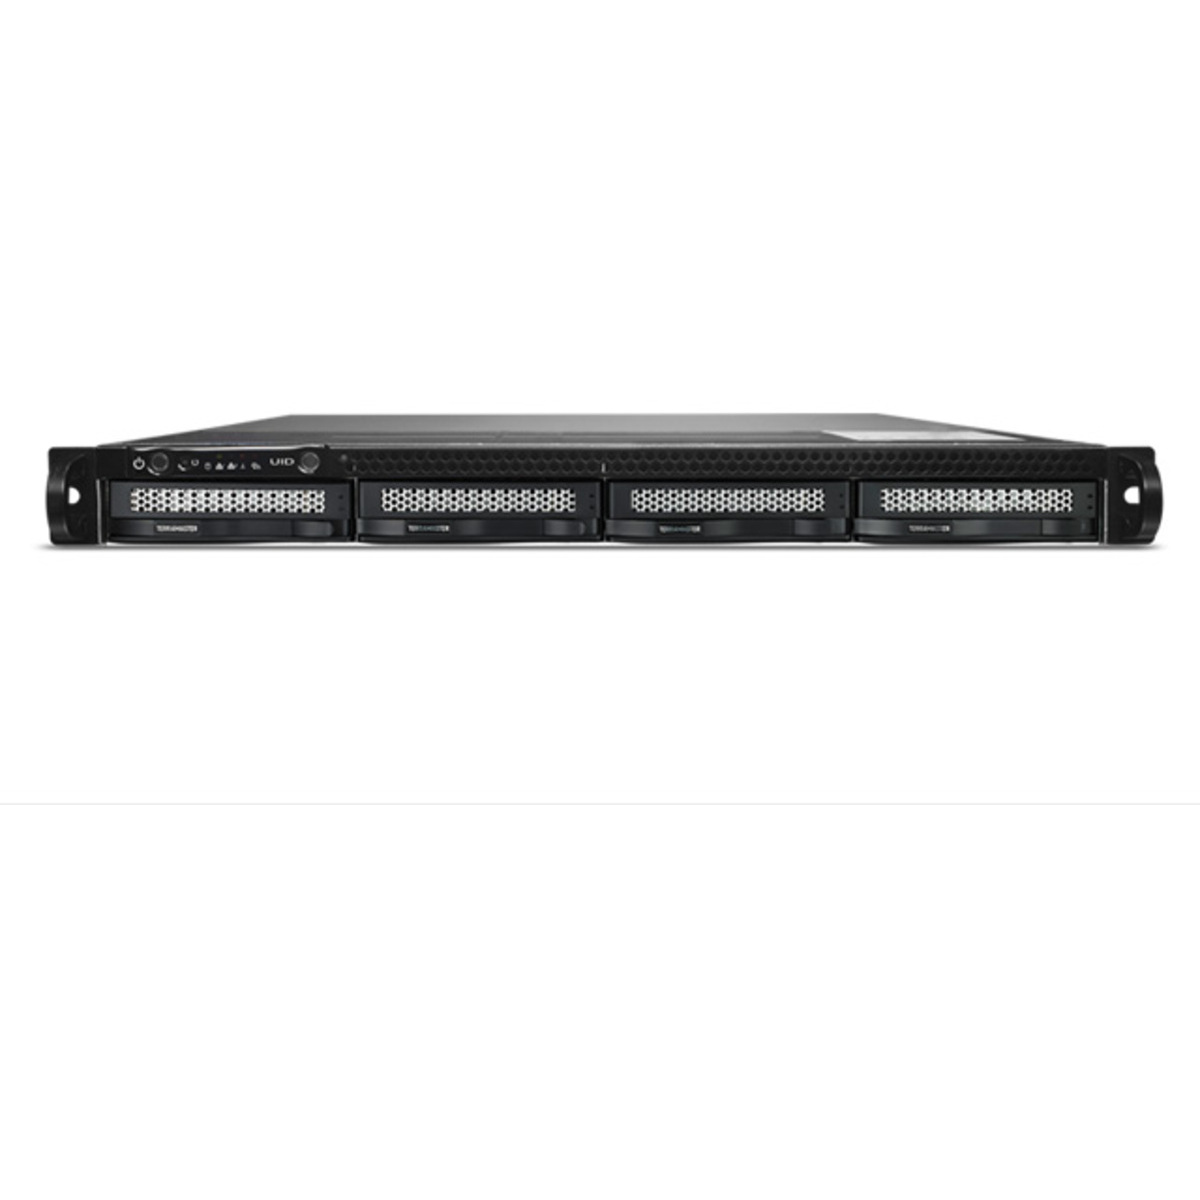 TerraMaster U4-111 32tb 4-Bay RackMount Multimedia / Power User / Business NAS - Network Attached Storage Device 2x16tb Seagate IronWolf Pro ST16000NT001 3.5 7200rpm SATA 6Gb/s HDD NAS Class Drives Installed - Burn-In Tested - ON SALE U4-111